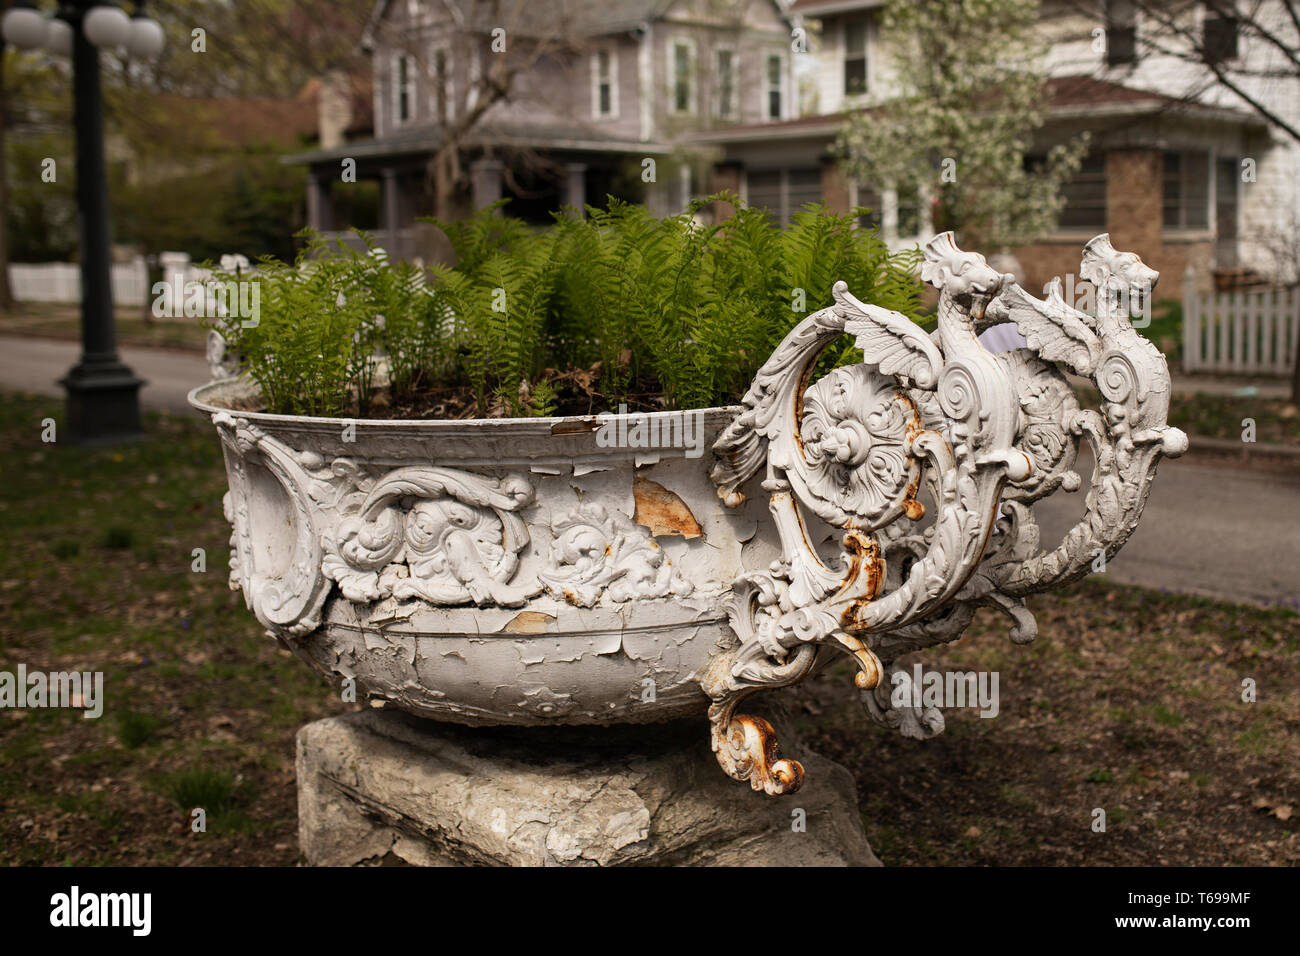 A large wrought iron Victorian planter, painted white and filled with ferns, in the historic Woodruff Place neighborhood in Indianapolis, Indiana, USA Stock Photo